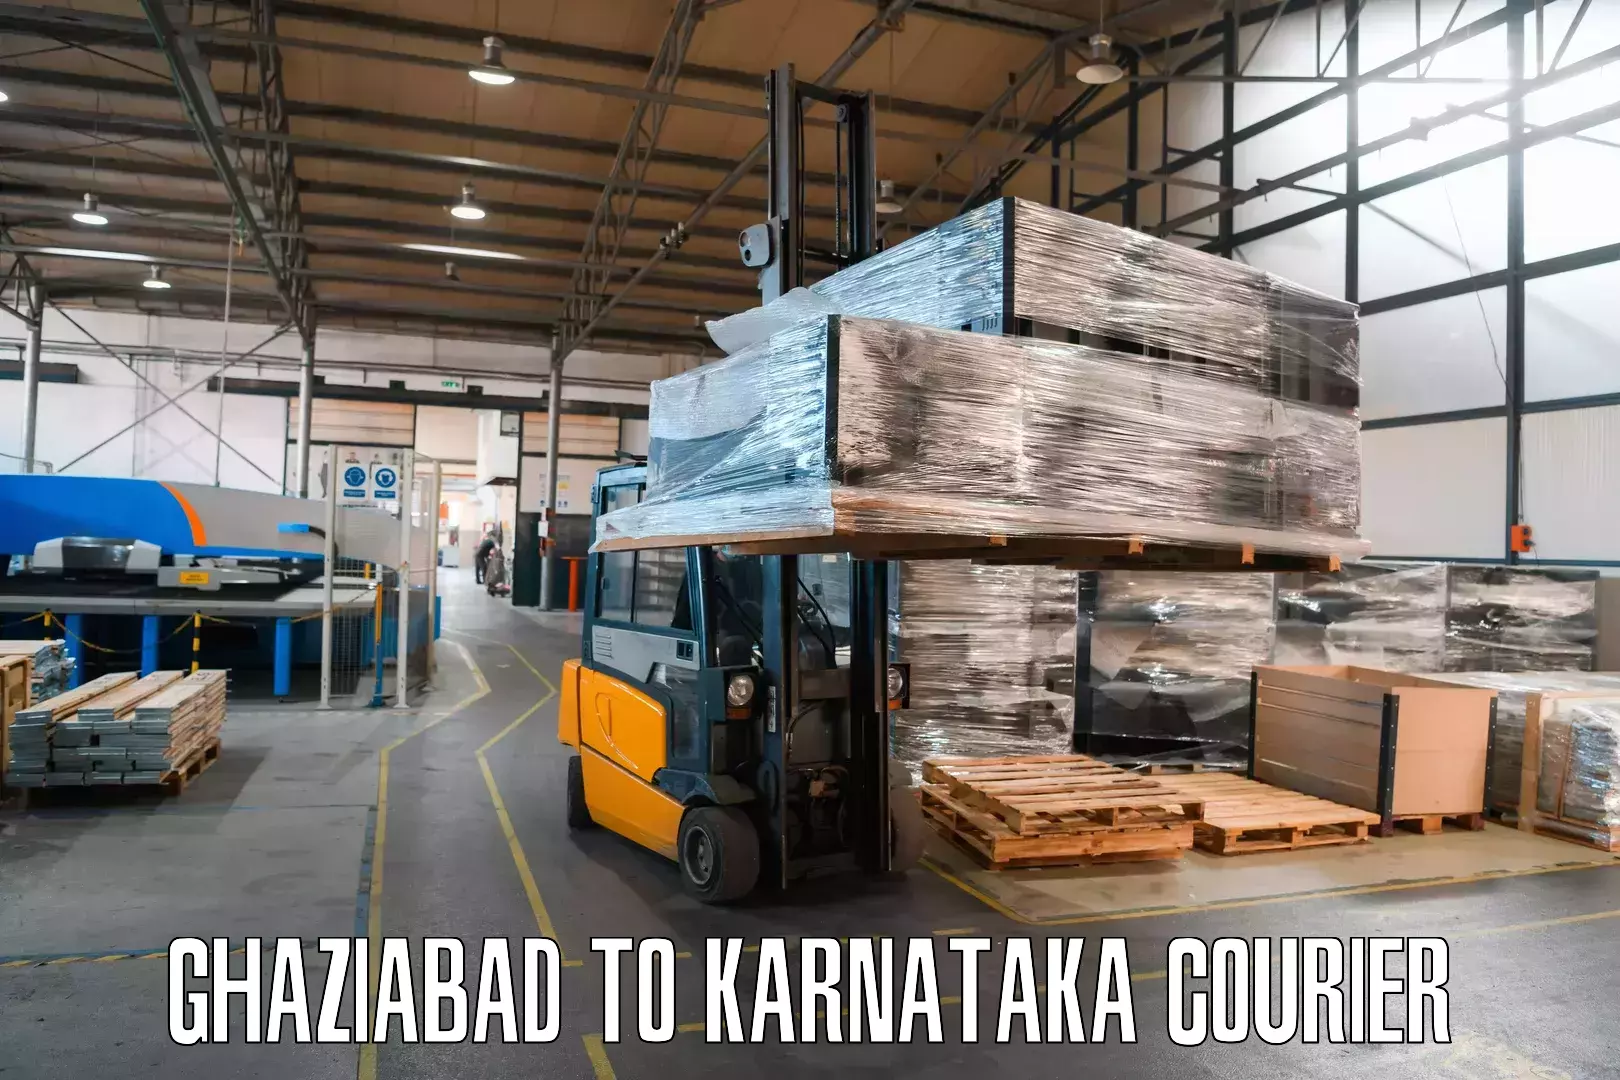 High-capacity parcel service Ghaziabad to Manipal